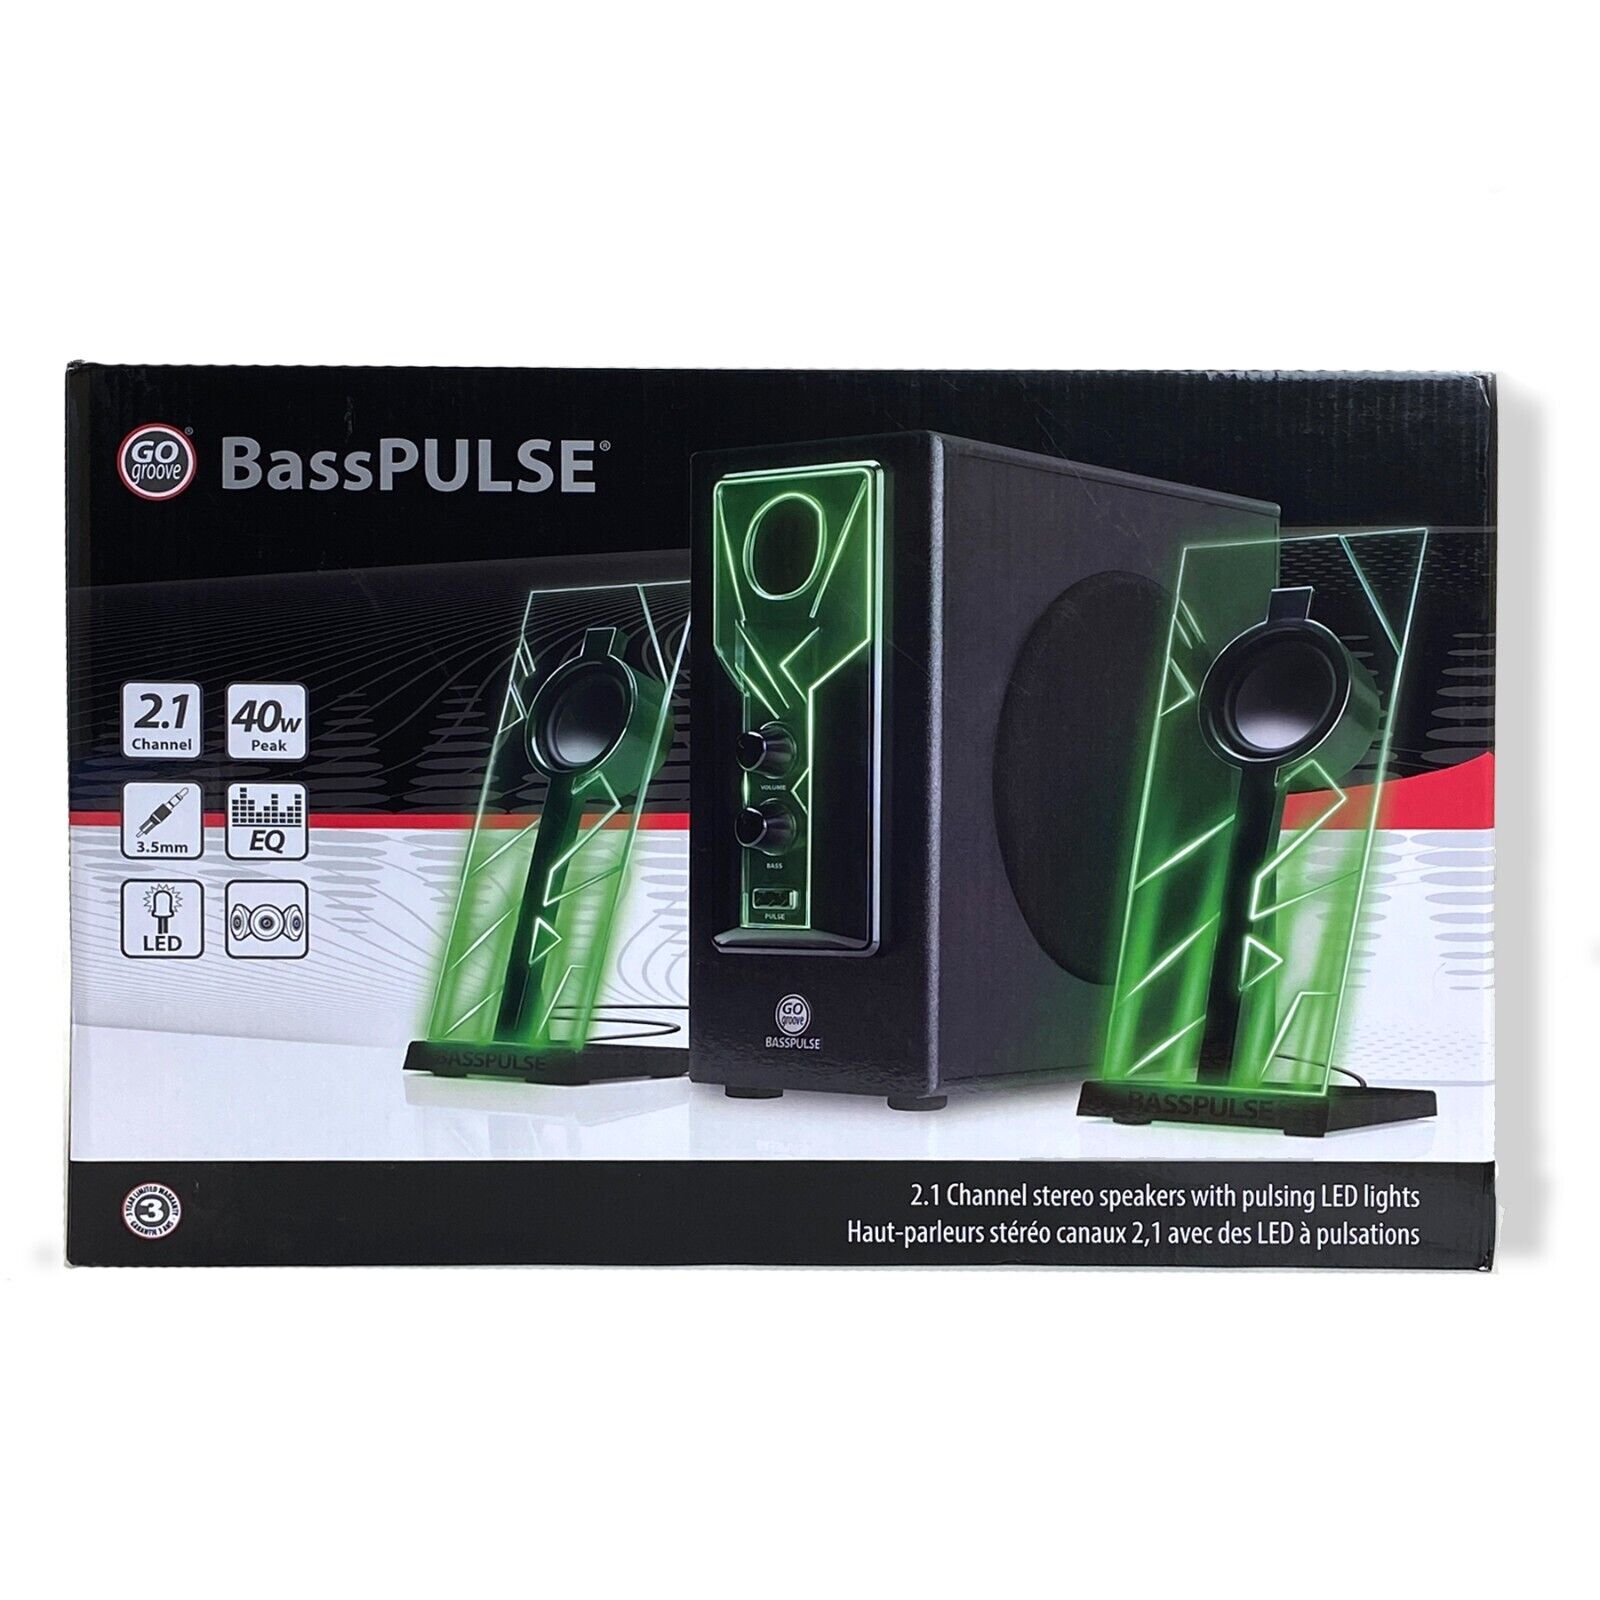 Go Groove BassPulse 2.1 Stereo Speakers With Pulsing LED Lights